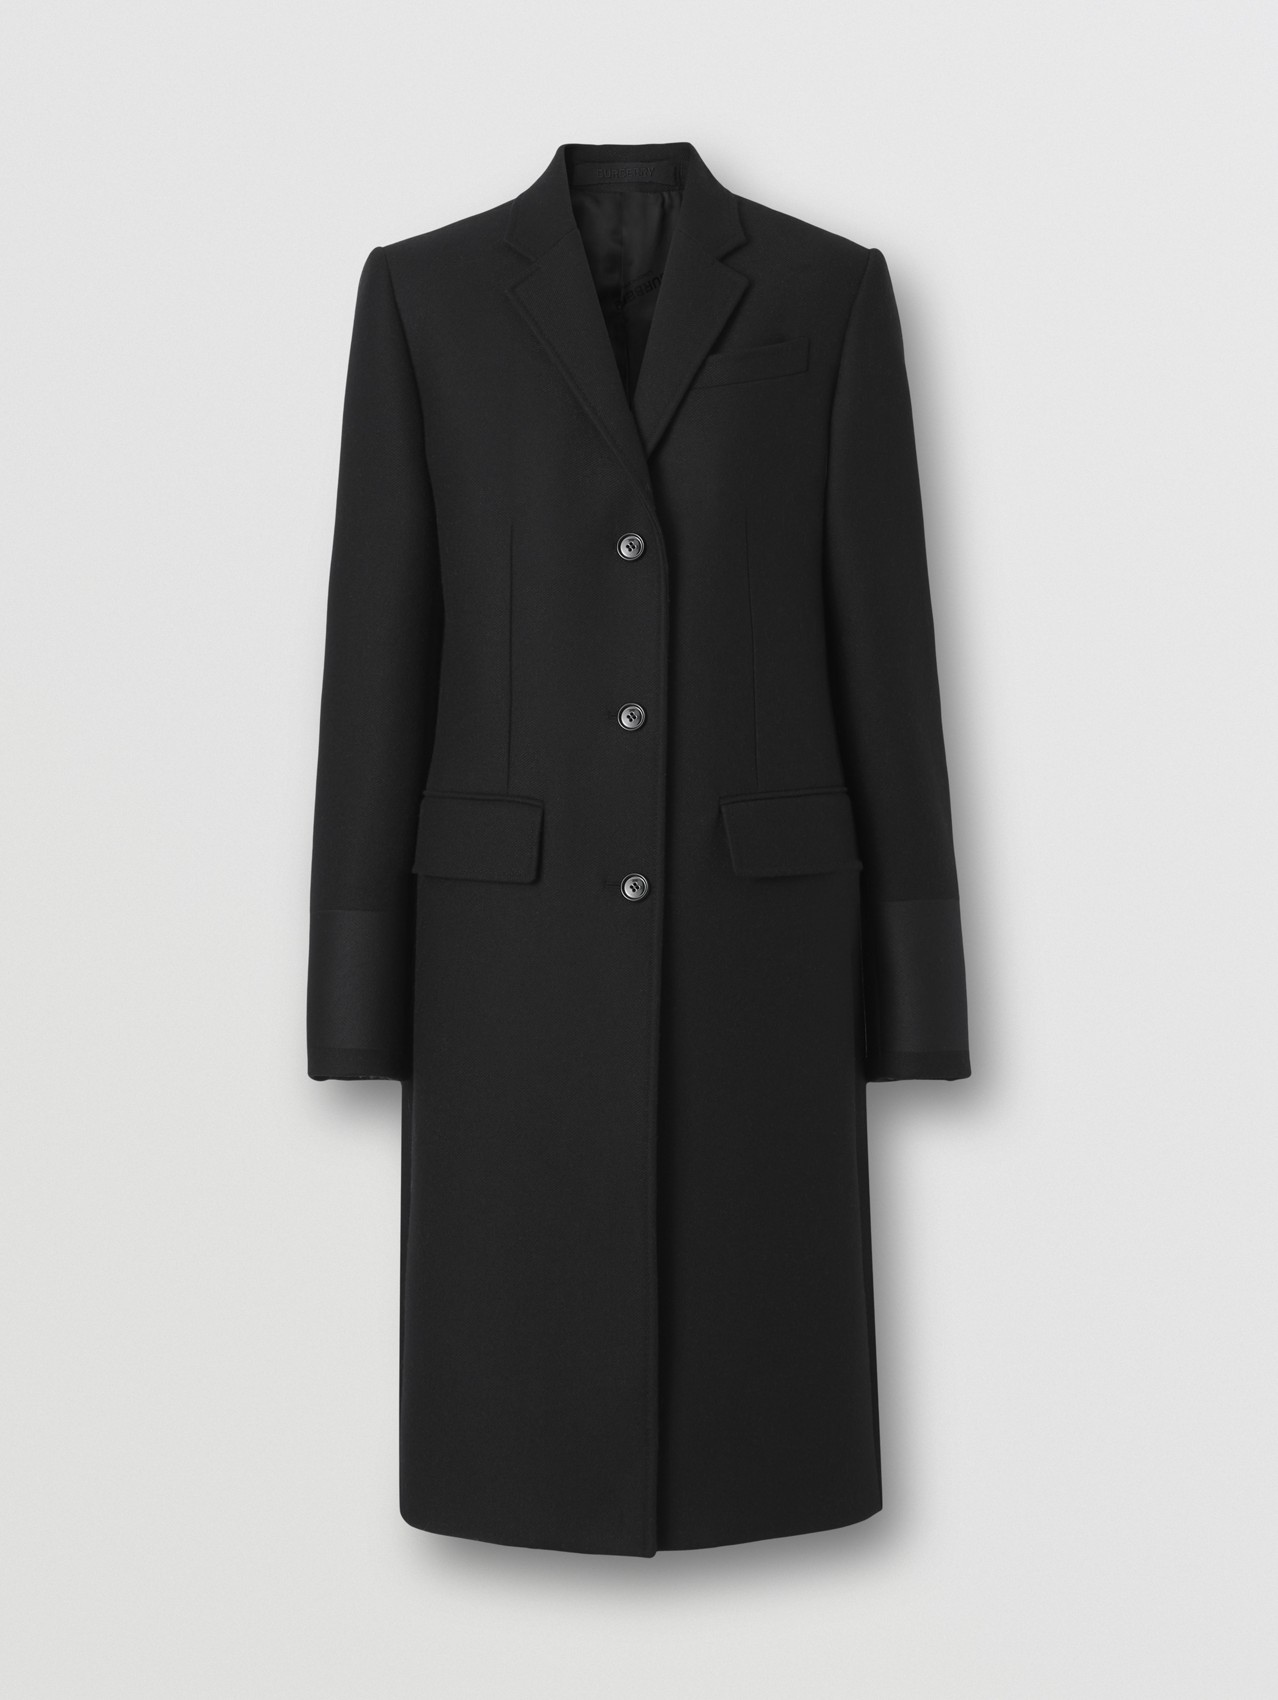 Cuff Detail Camel Hair Wool Tailored Coat in Black